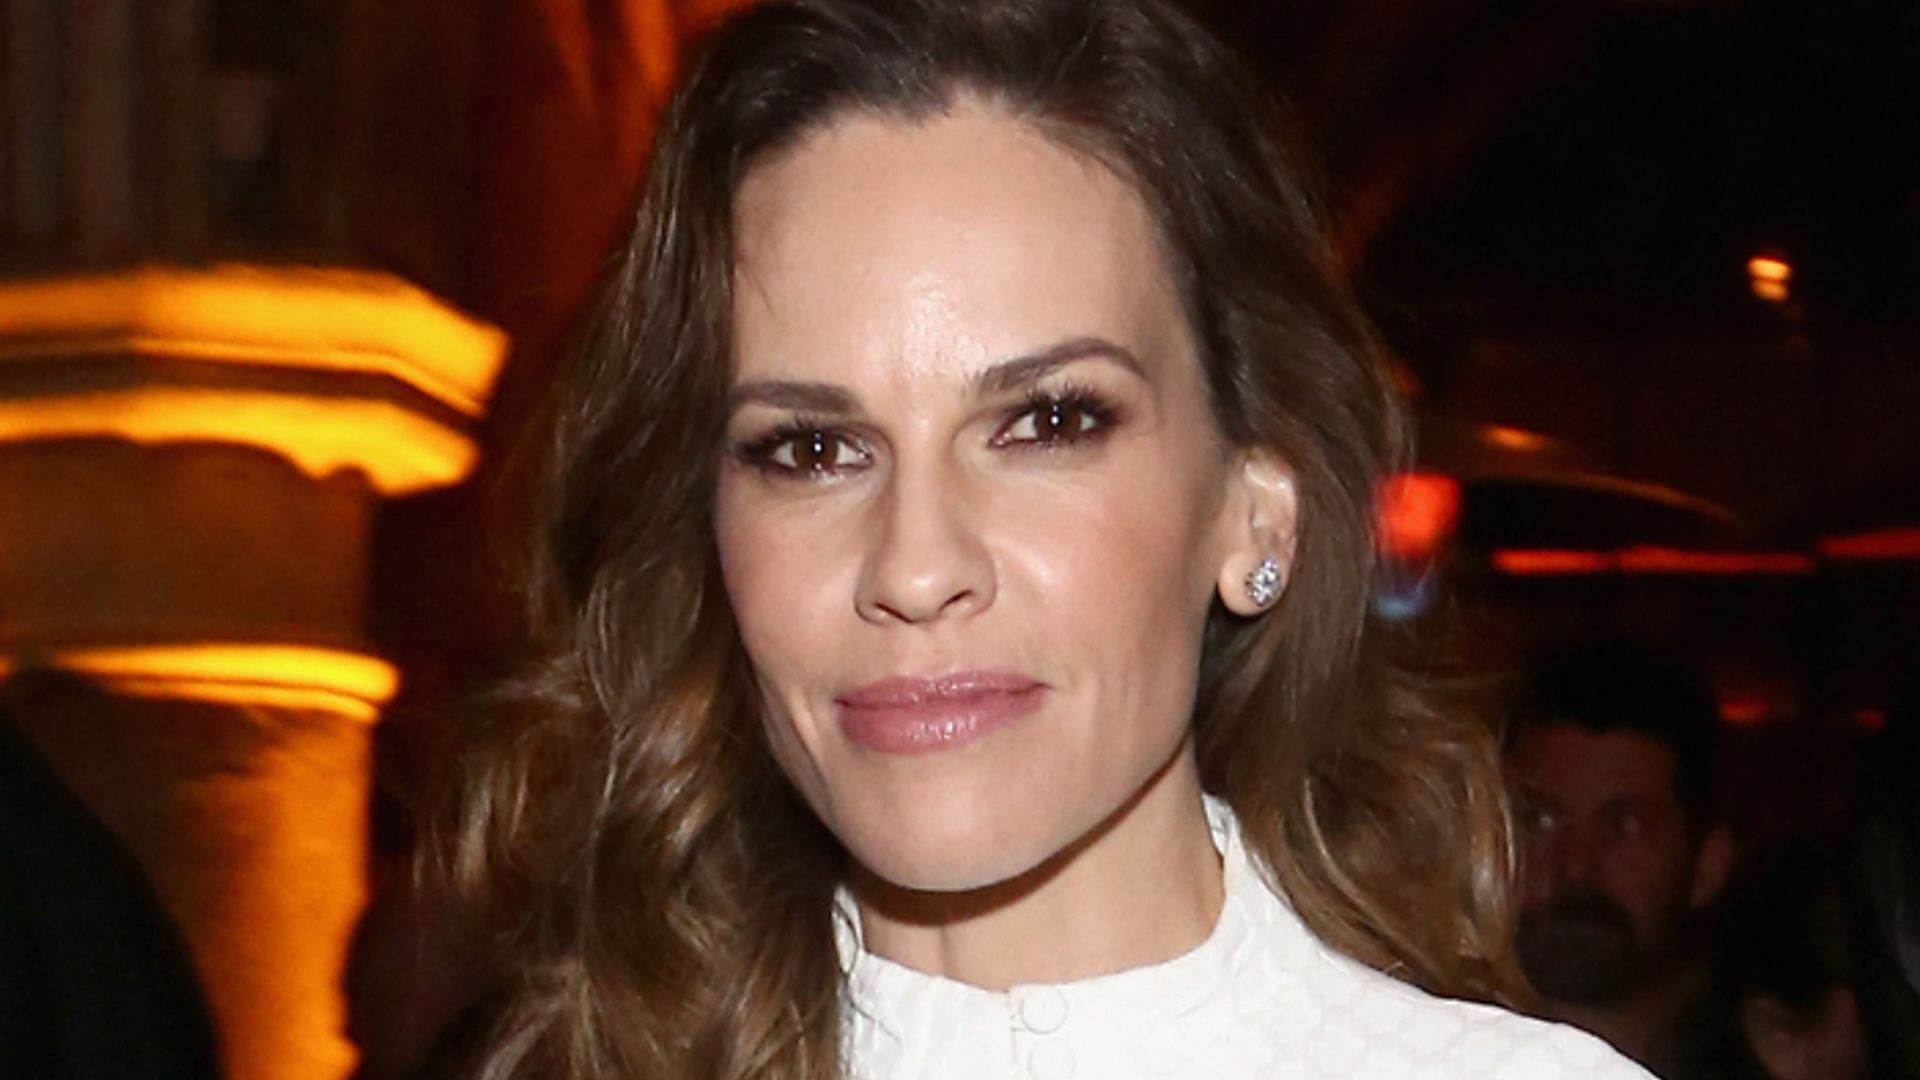 Hilary Swank has a strong response to complaints about motherhood